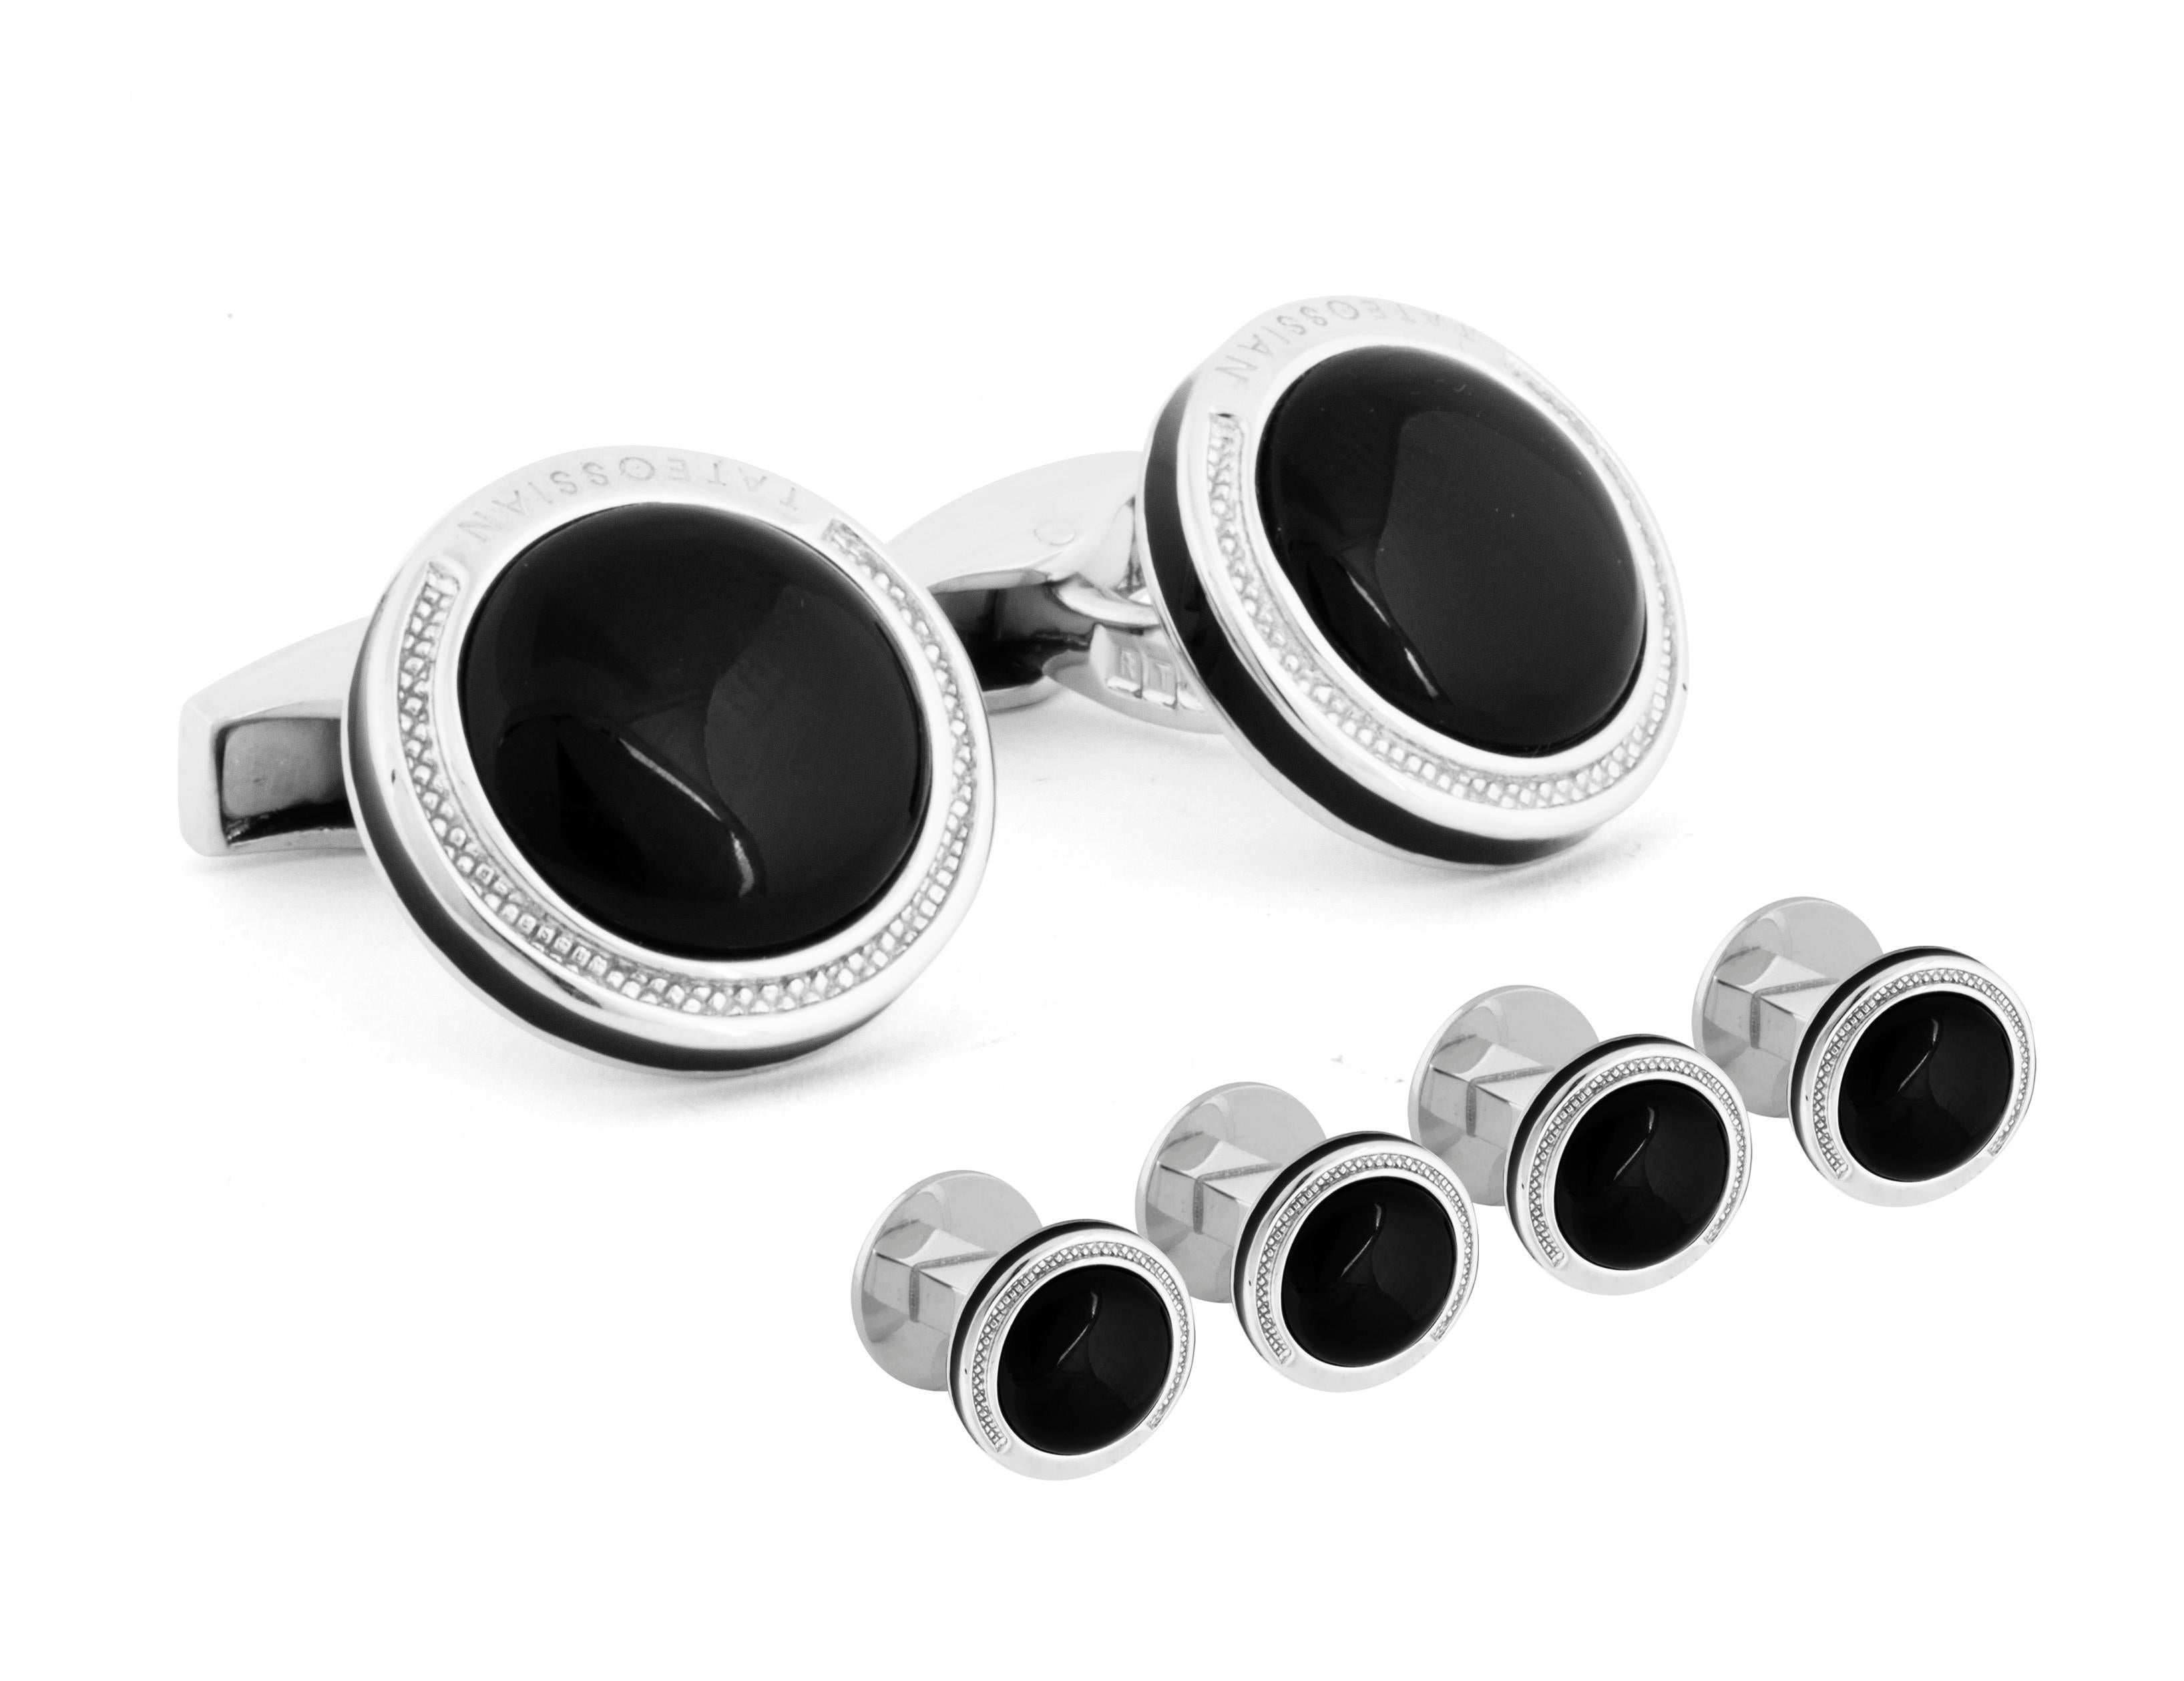 This round cufflink & shirt stud set has a smooth, domed semi precious stone with the signature Tateossian diamond pattern crisply engraved into the border of the frame. The side of the cufflink has a thin line of enamel matching the colour of the